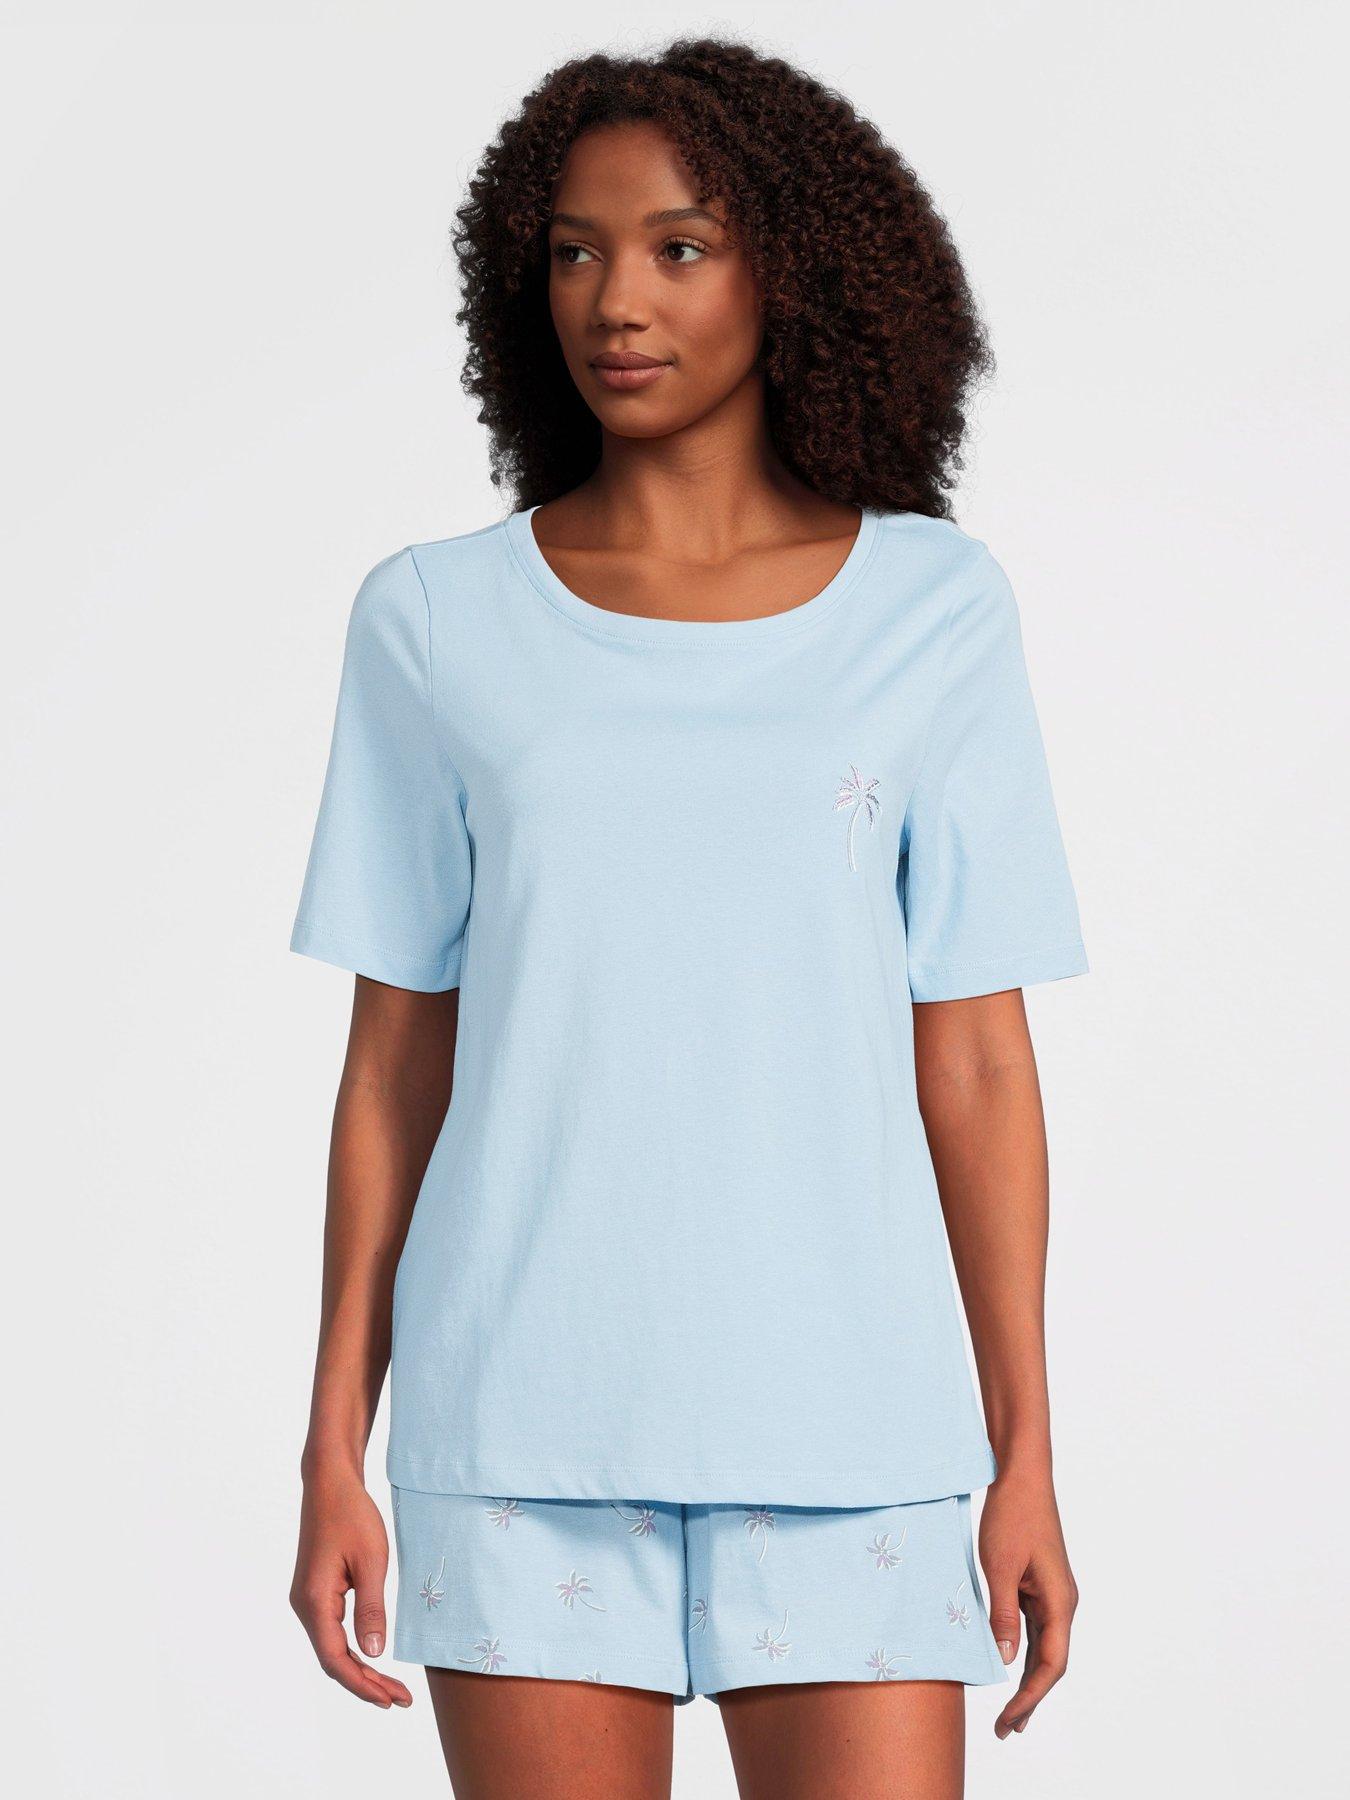 FAMILY PJs Sets Light Blue Ribbed Printed Cuffed Sleeve Crew Neck T-Shirt  Cuffed Everyday Size M